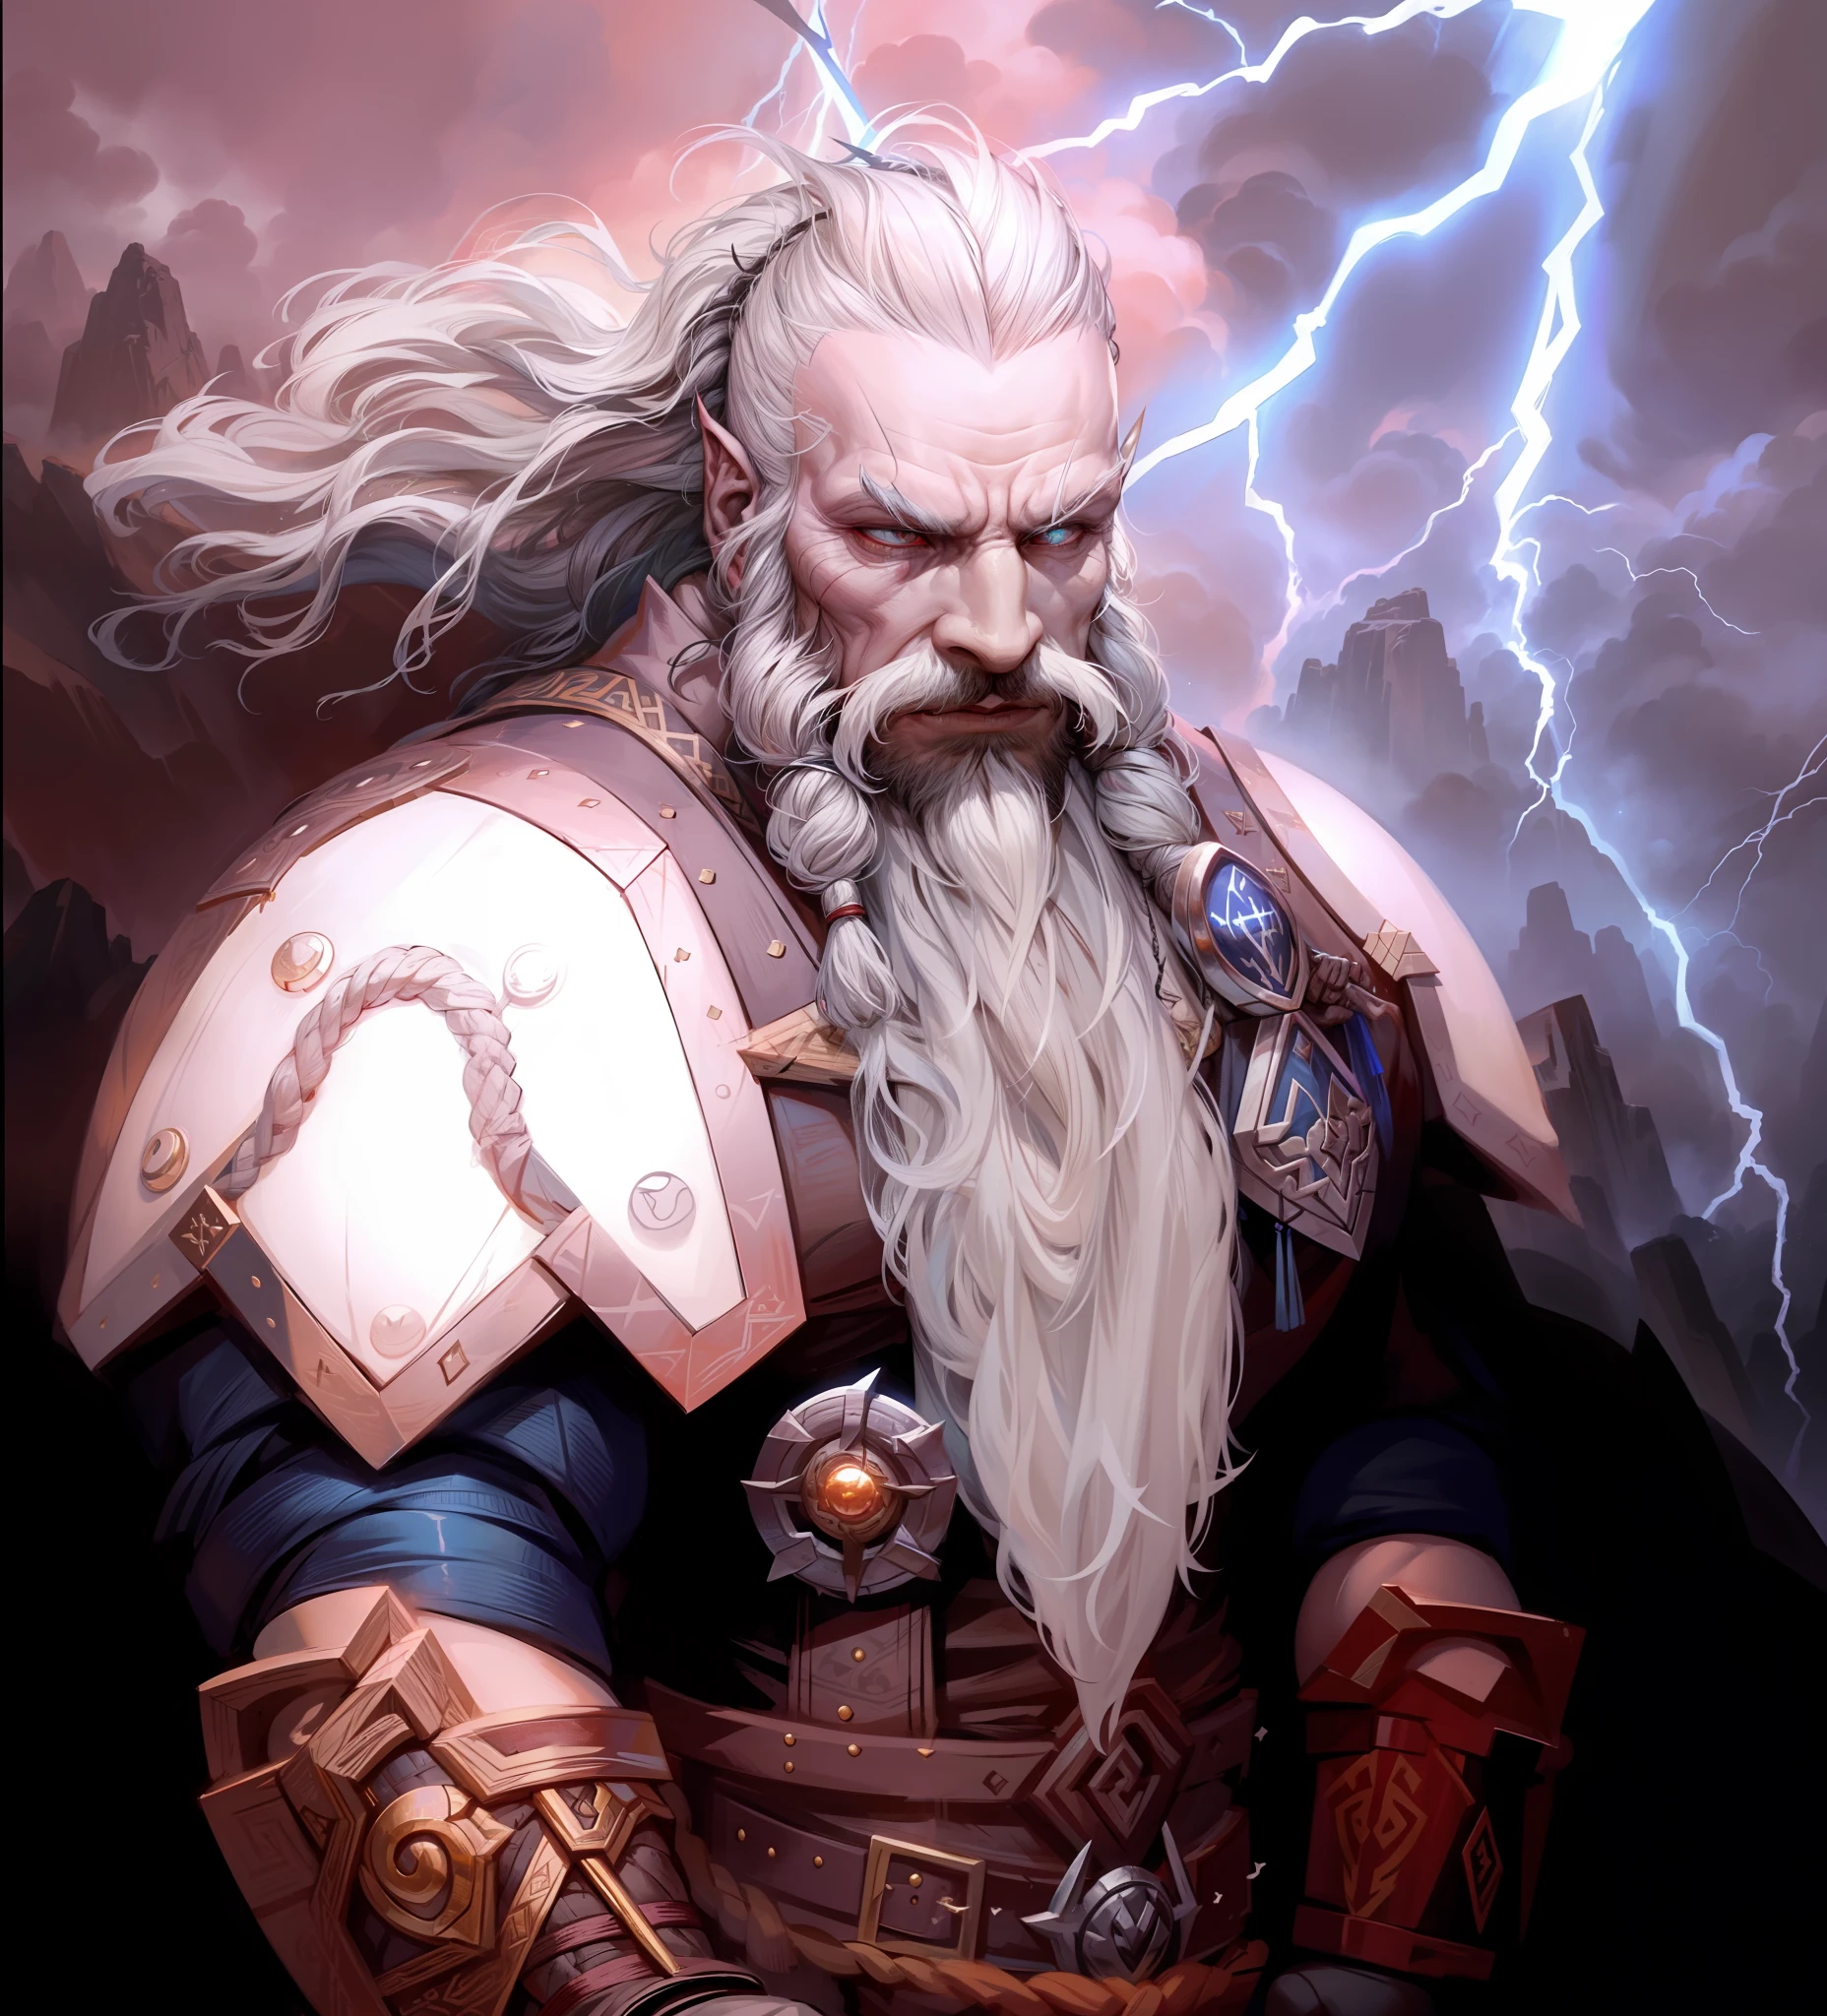 Thorin: Dwarven god of Thunder War and Lightning, mithycal dwarf, norse tattoos on his head, lightning coming out of his eyes, lightning, god of thunder, thunder and lightning, huge nose, holding a Legendary axe in one hand and a Legendary hammer in the other hand, white hair shaved on the sides, braided mohawk, head tattoos, braided white beard, wolfs sculpted inn his armor, extremely intimidating, wrath, anger, glowing eyes, god, godly power, god-like power of lightning, huge thick nose, big nose, Dwarven god, dwarf, dwarf from Lord of the Rings, dwarf god